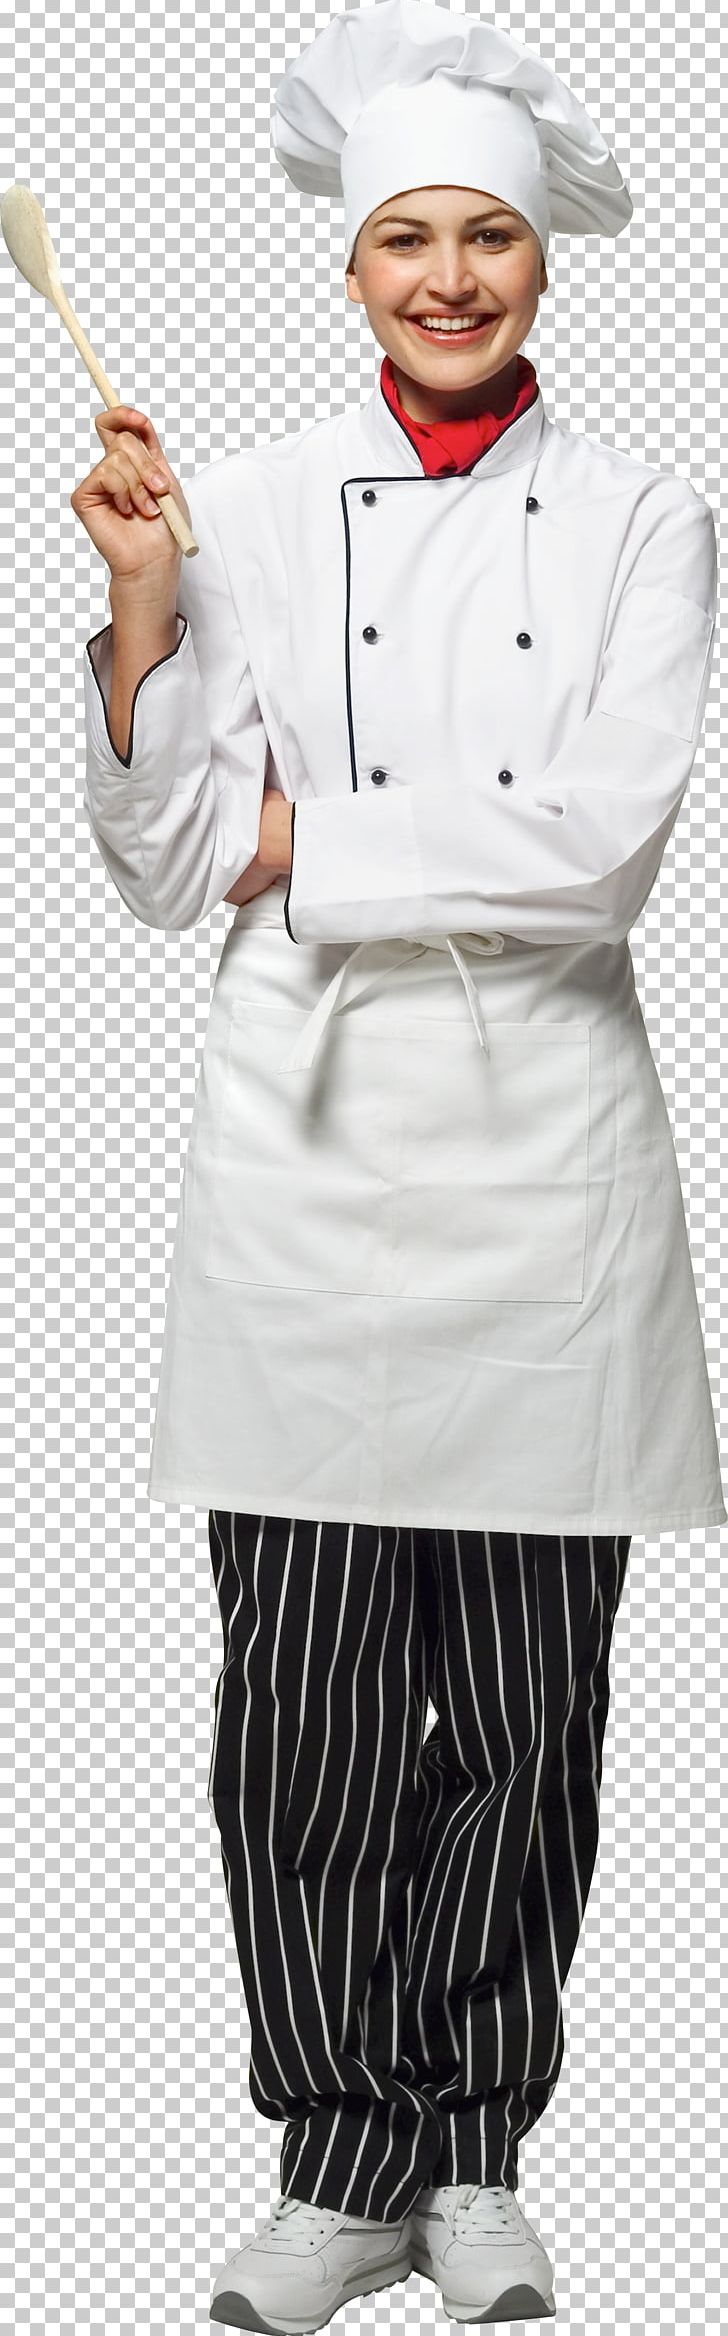 Chef's Uniform Kitchen Cooking PNG, Clipart, Cooking, Kitchen, Others Free PNG Download